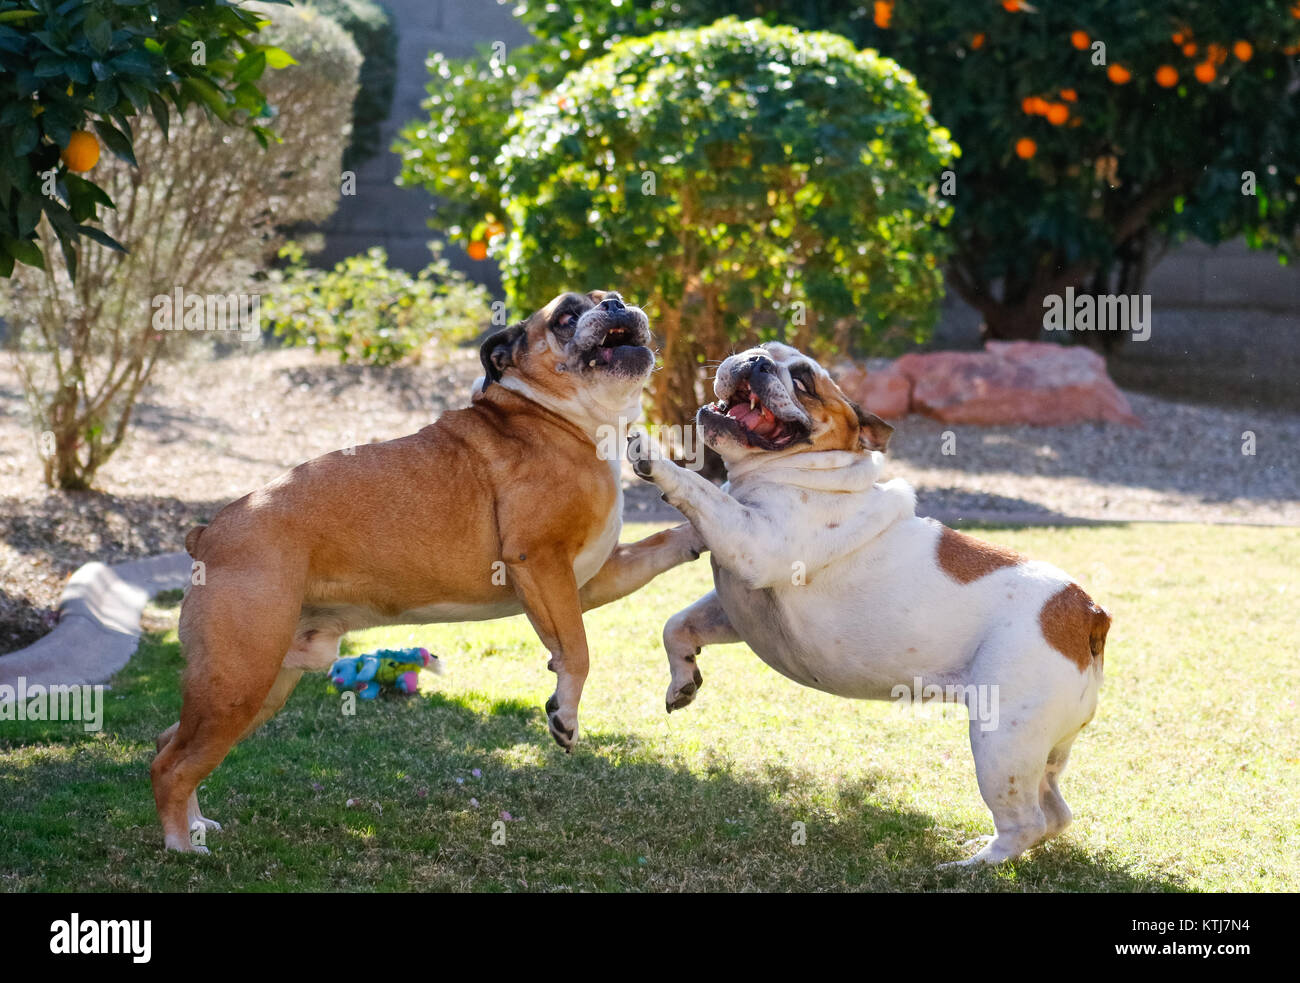 Two bulldogs playing and wrestling in the backyard on the grass Stock Photo